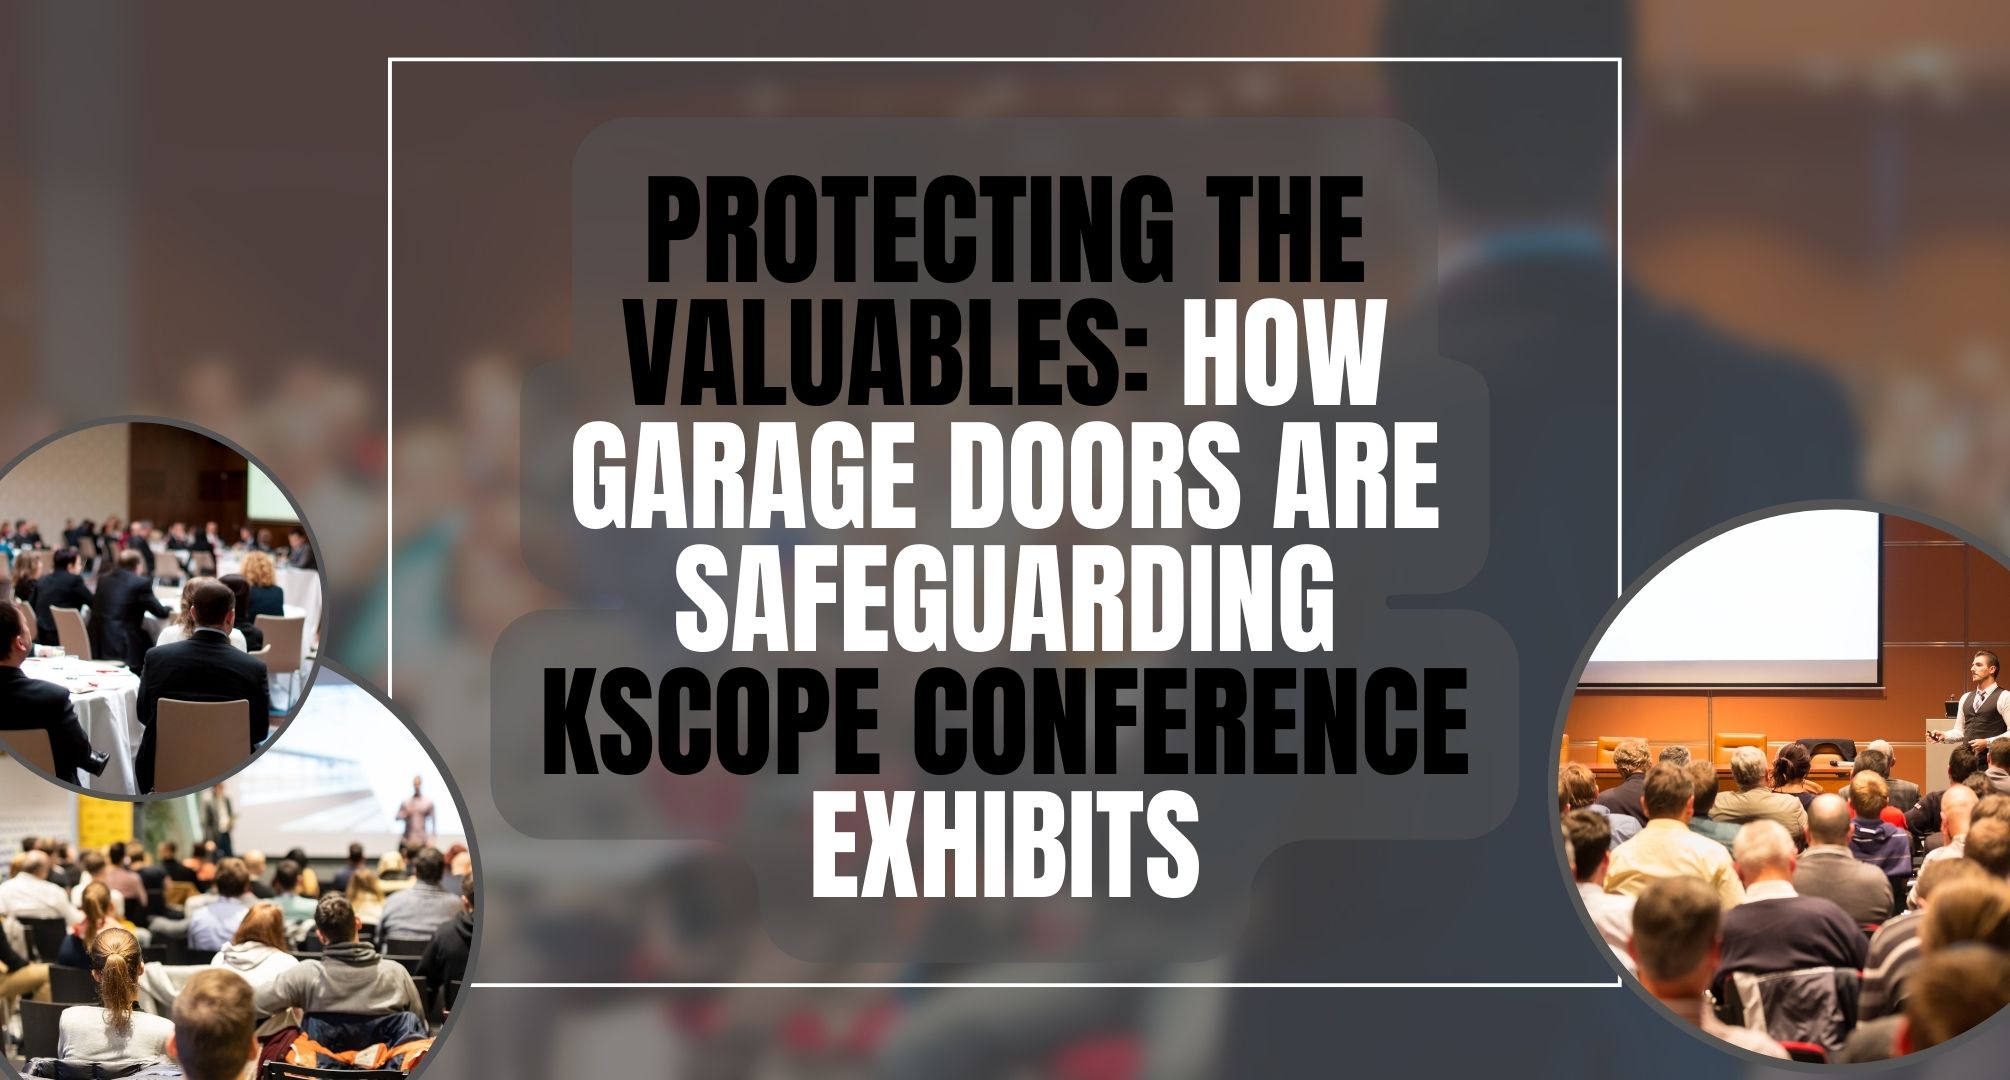 Protecting the Valuables How Garage Doors are Safeguarding Kscope Conference Exhibits